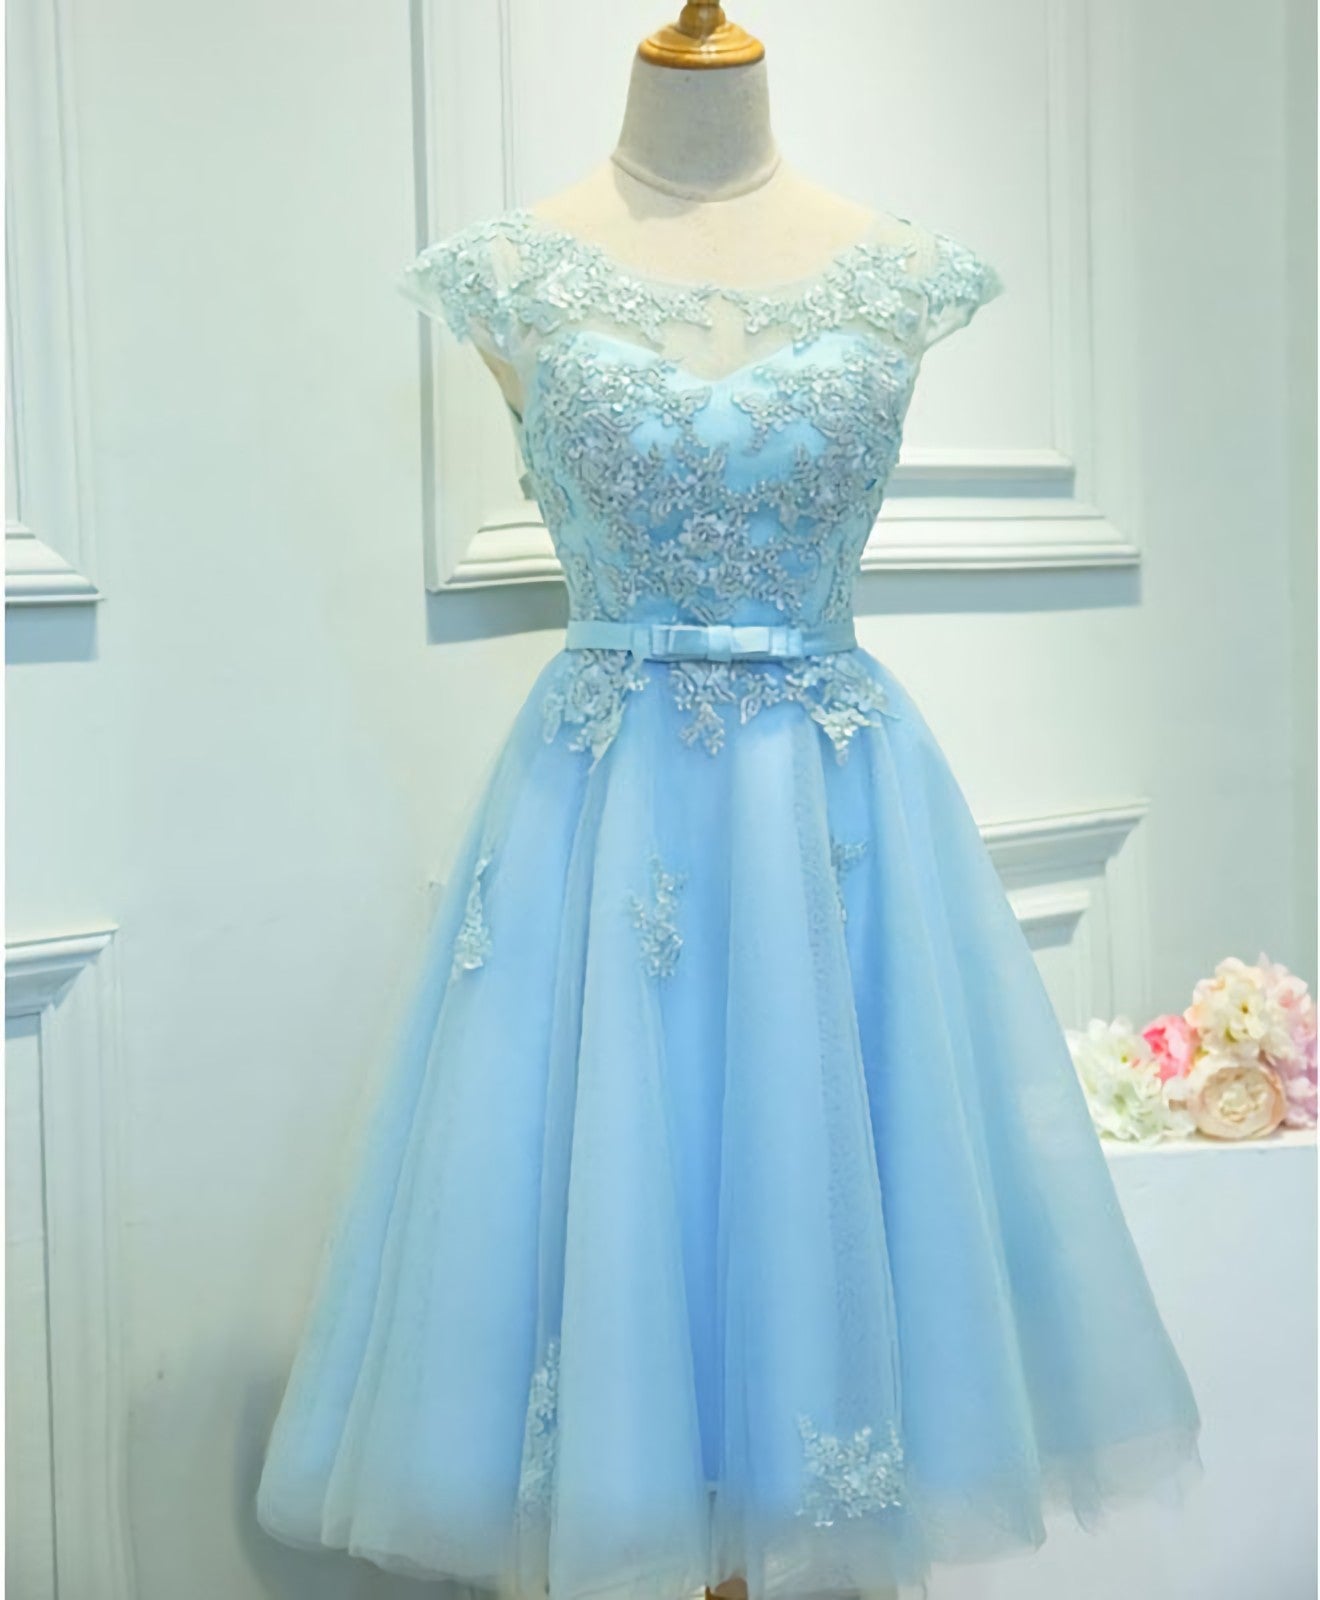 Evening Dress Sleeves, Light Blue Lace Tulle Short Prom Dress, Homecoming Dress